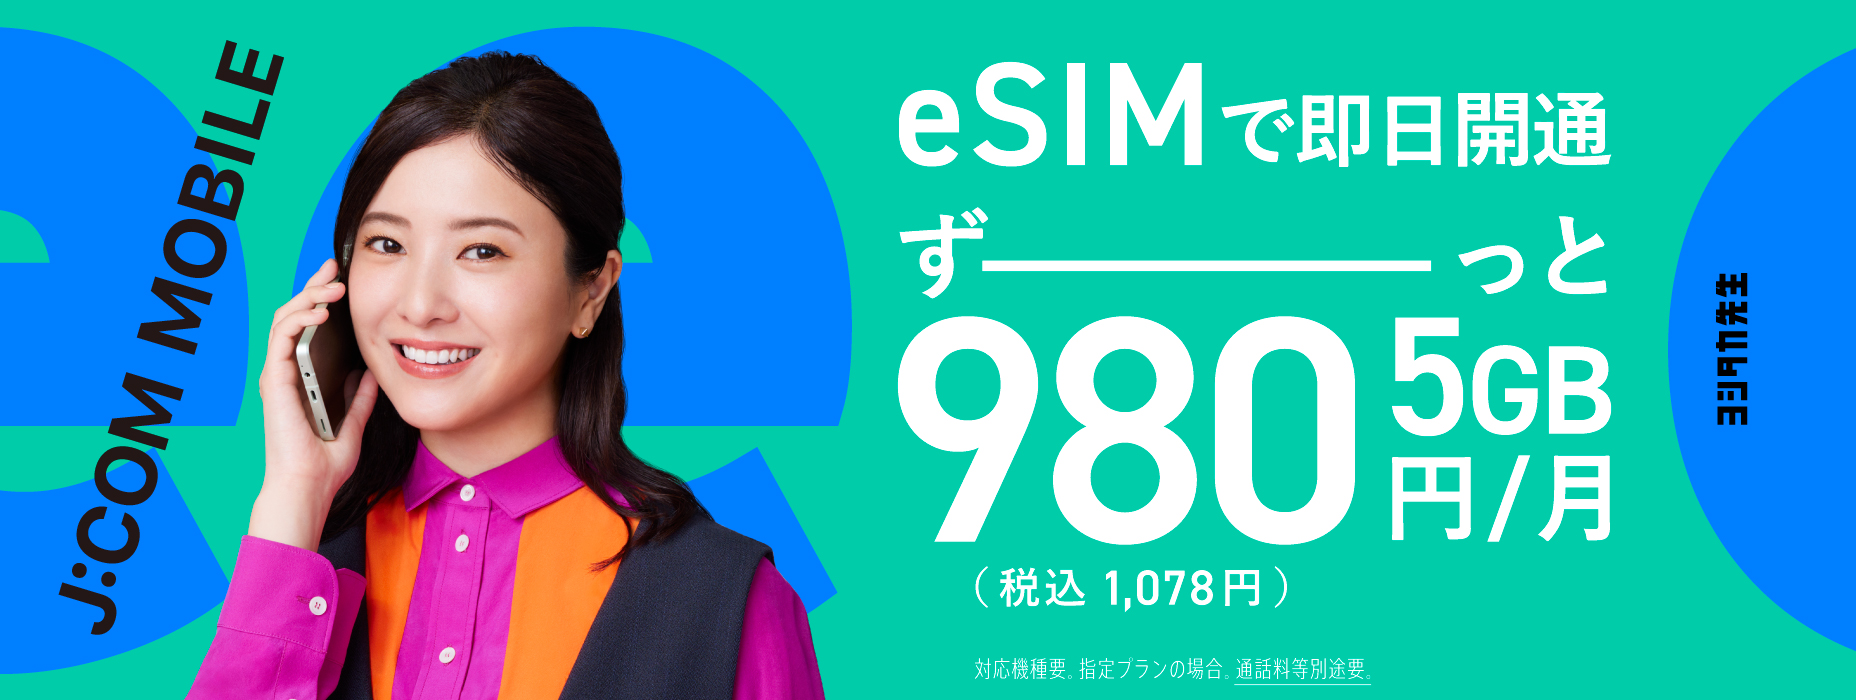 New eSIM! 5GB all the way 980 yen (1,078 yen including tax) when Date Mori is applied